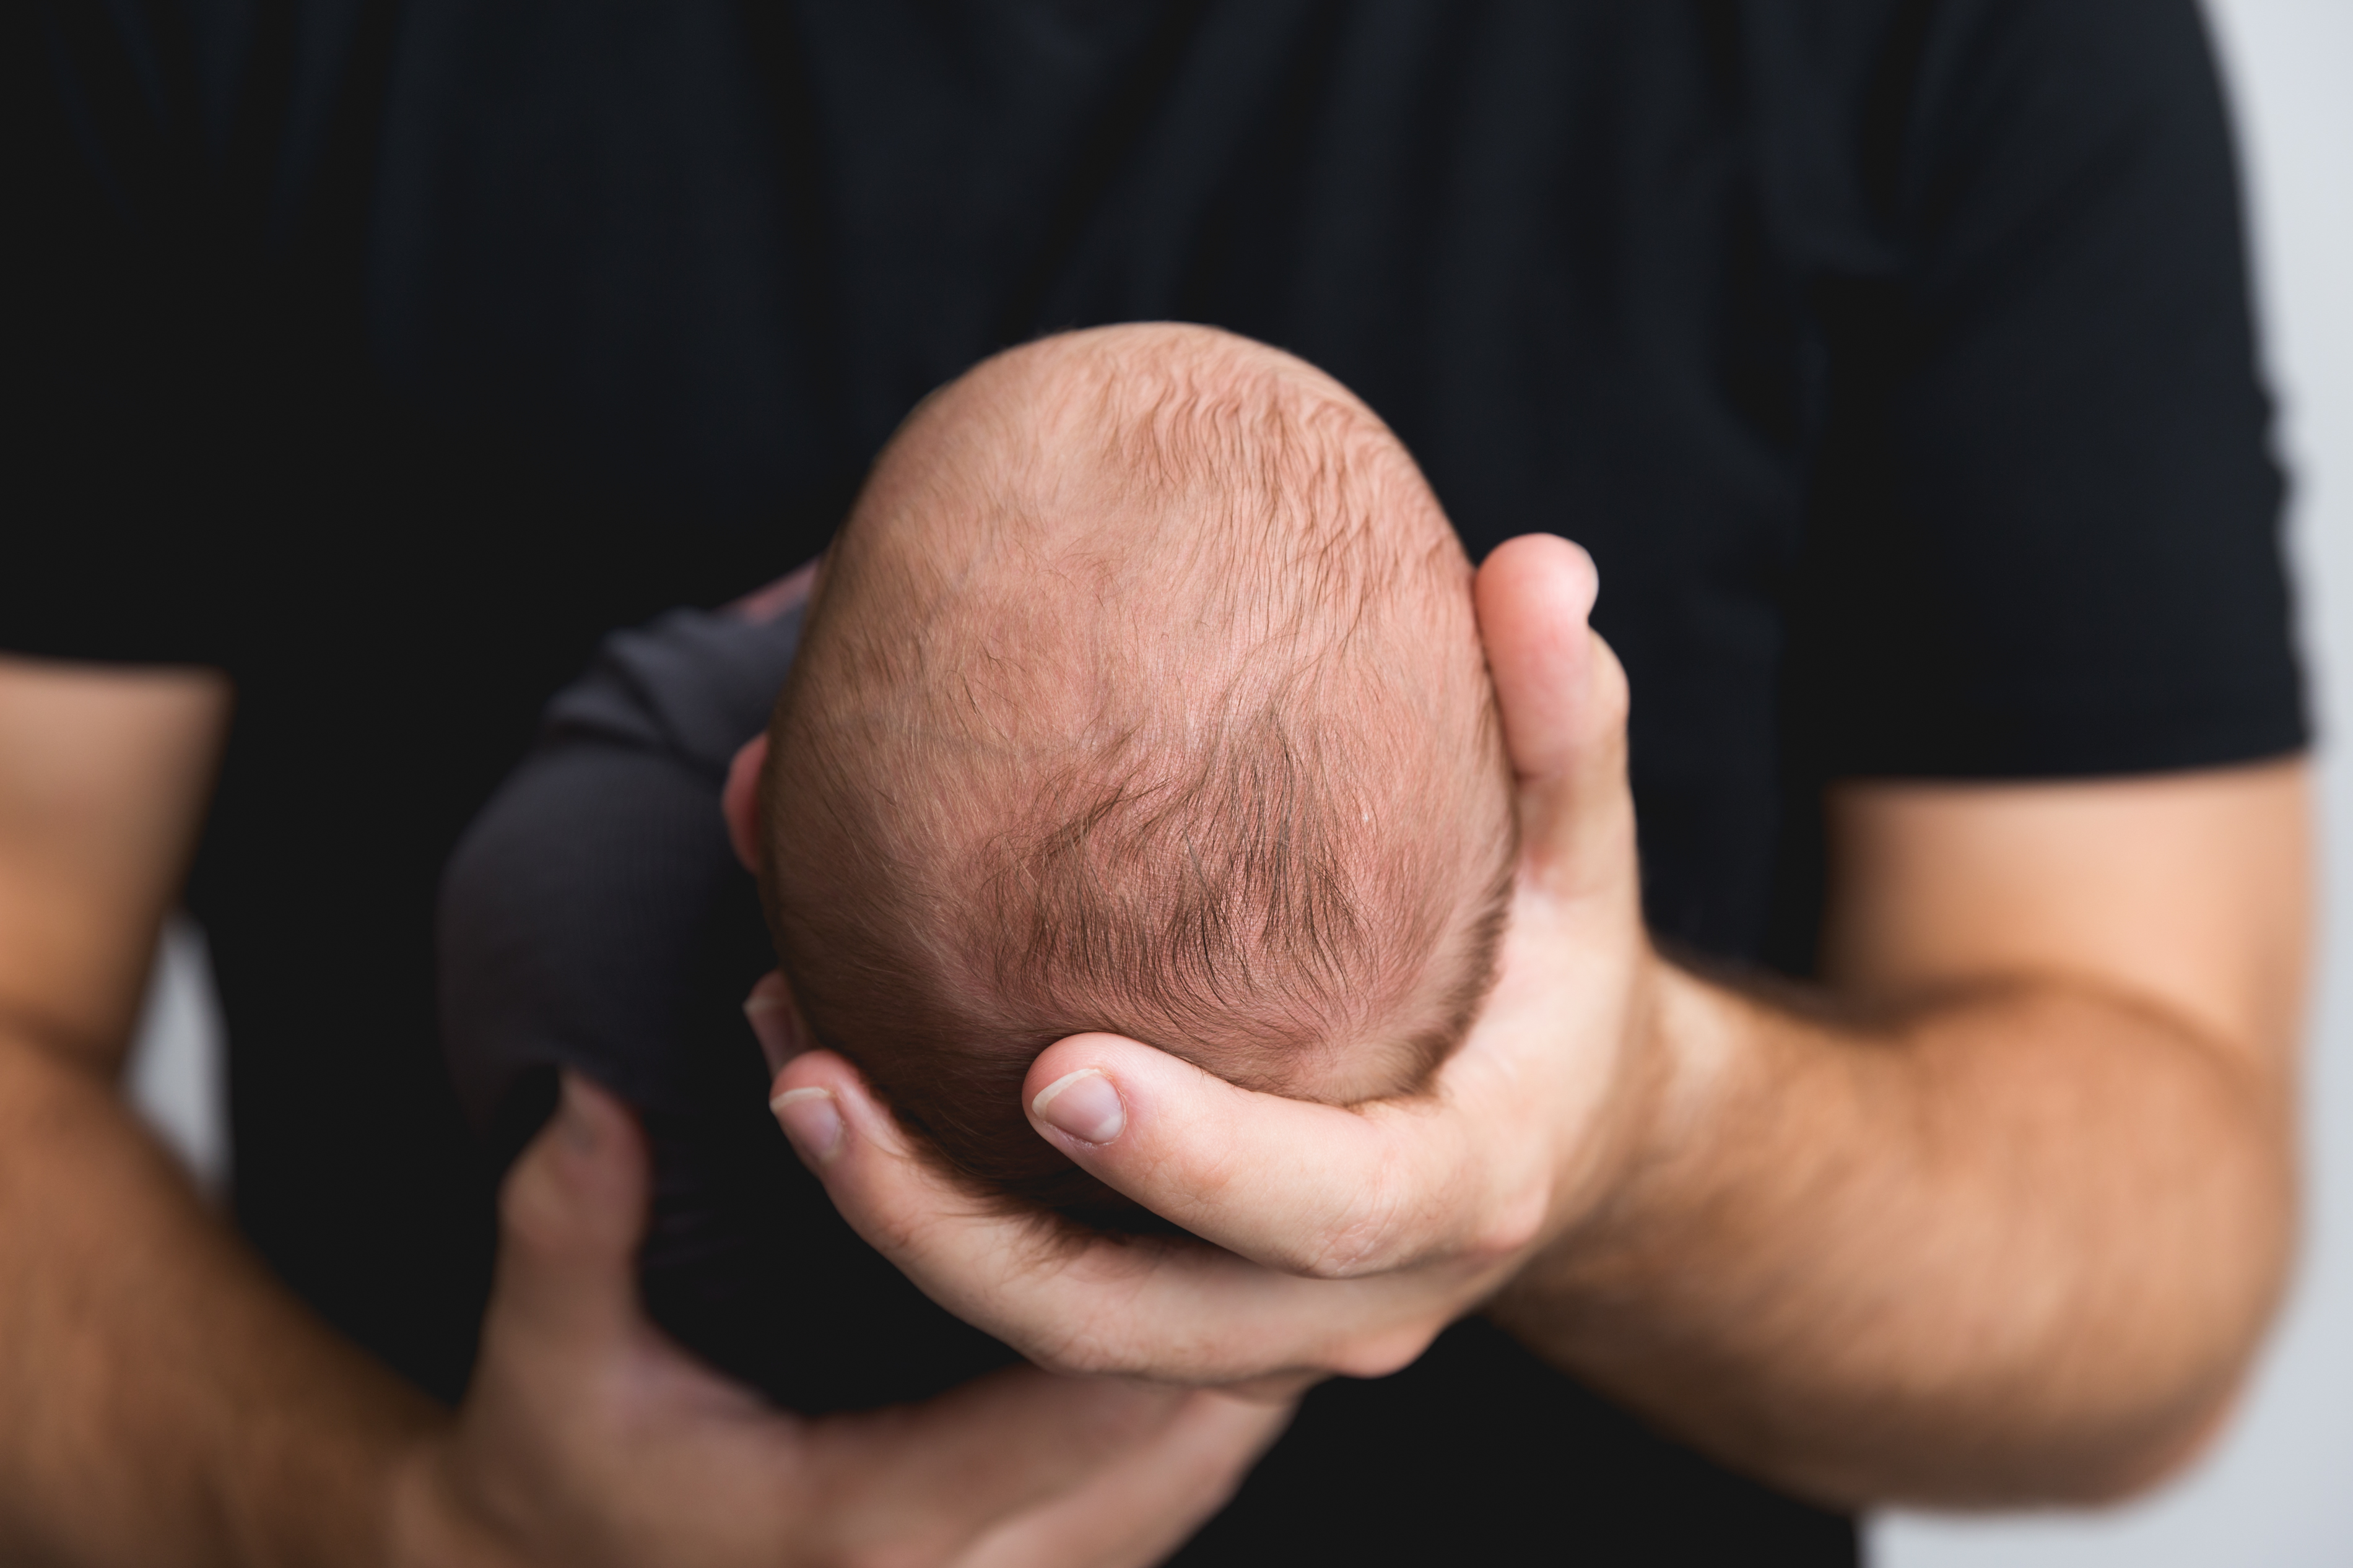 How to take newborn photos at home